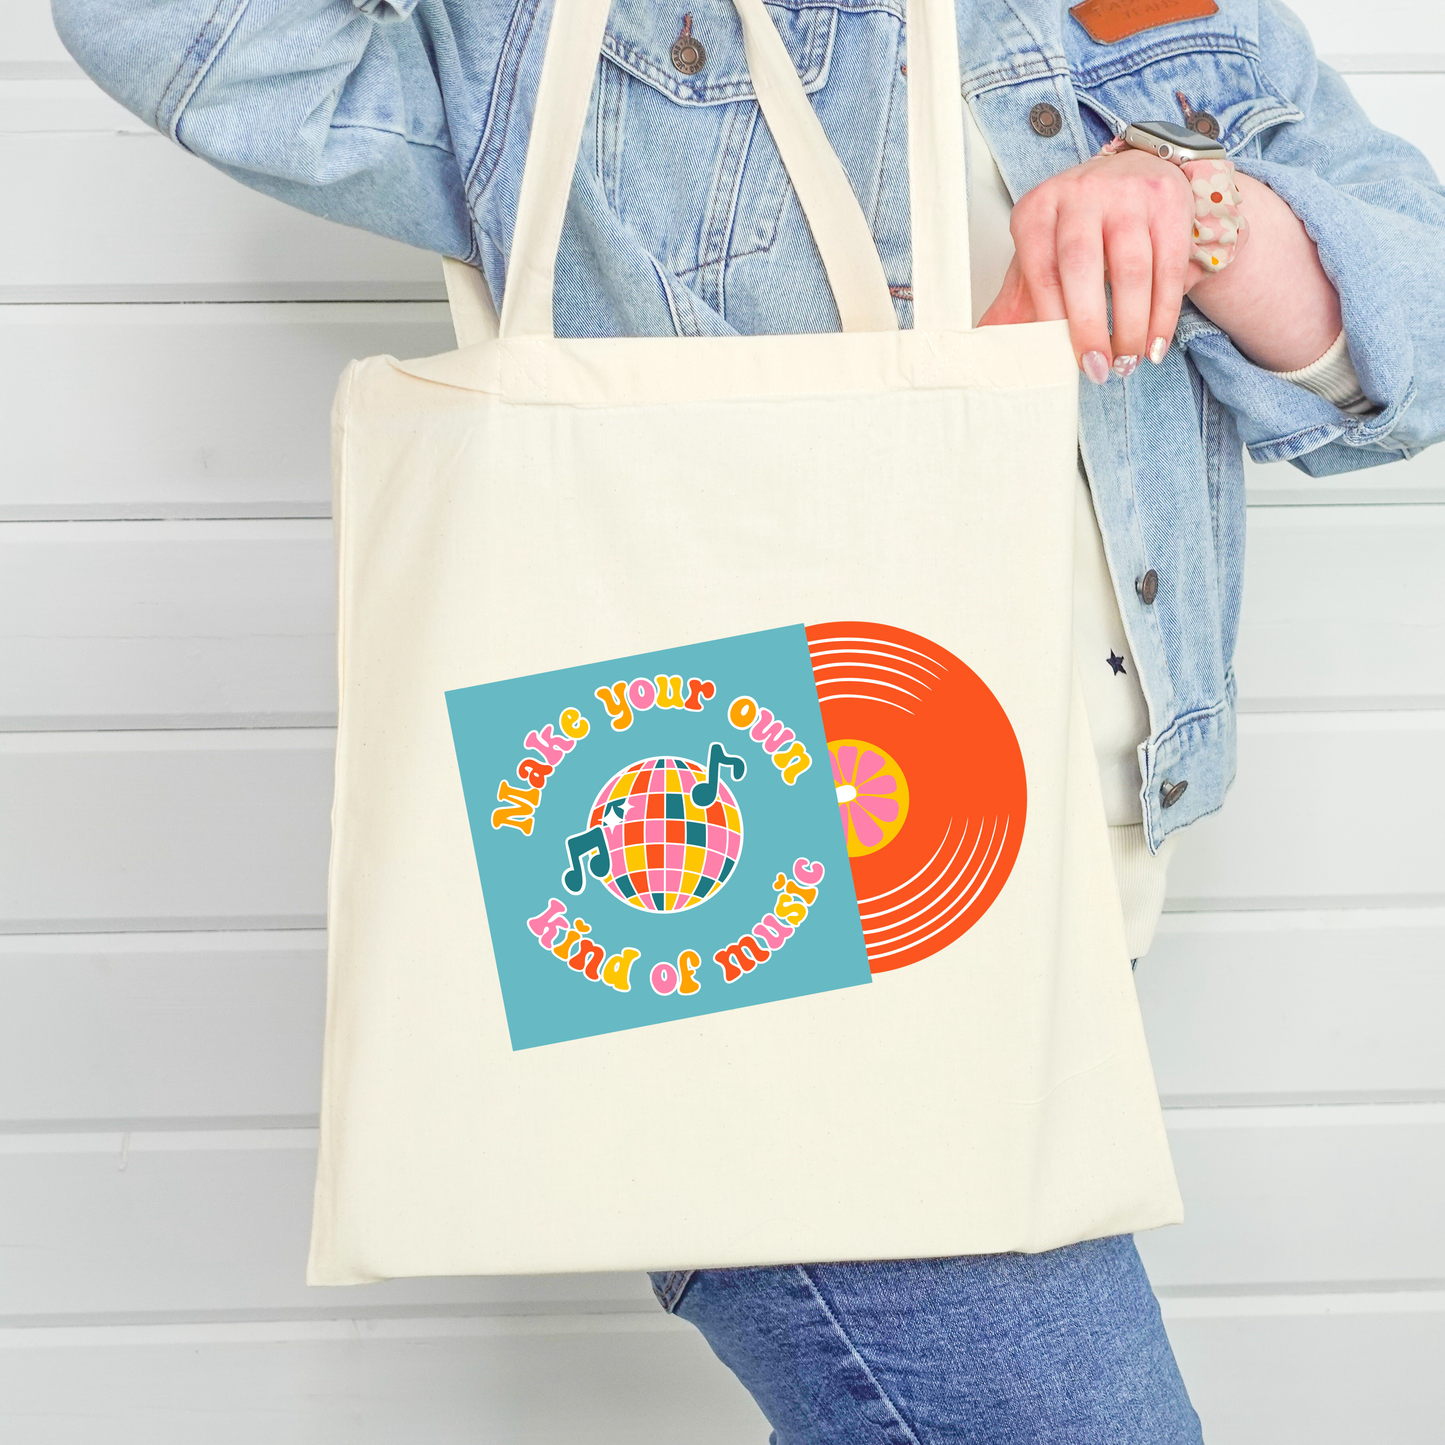 Make Your Own Kind of Music Tote Bag